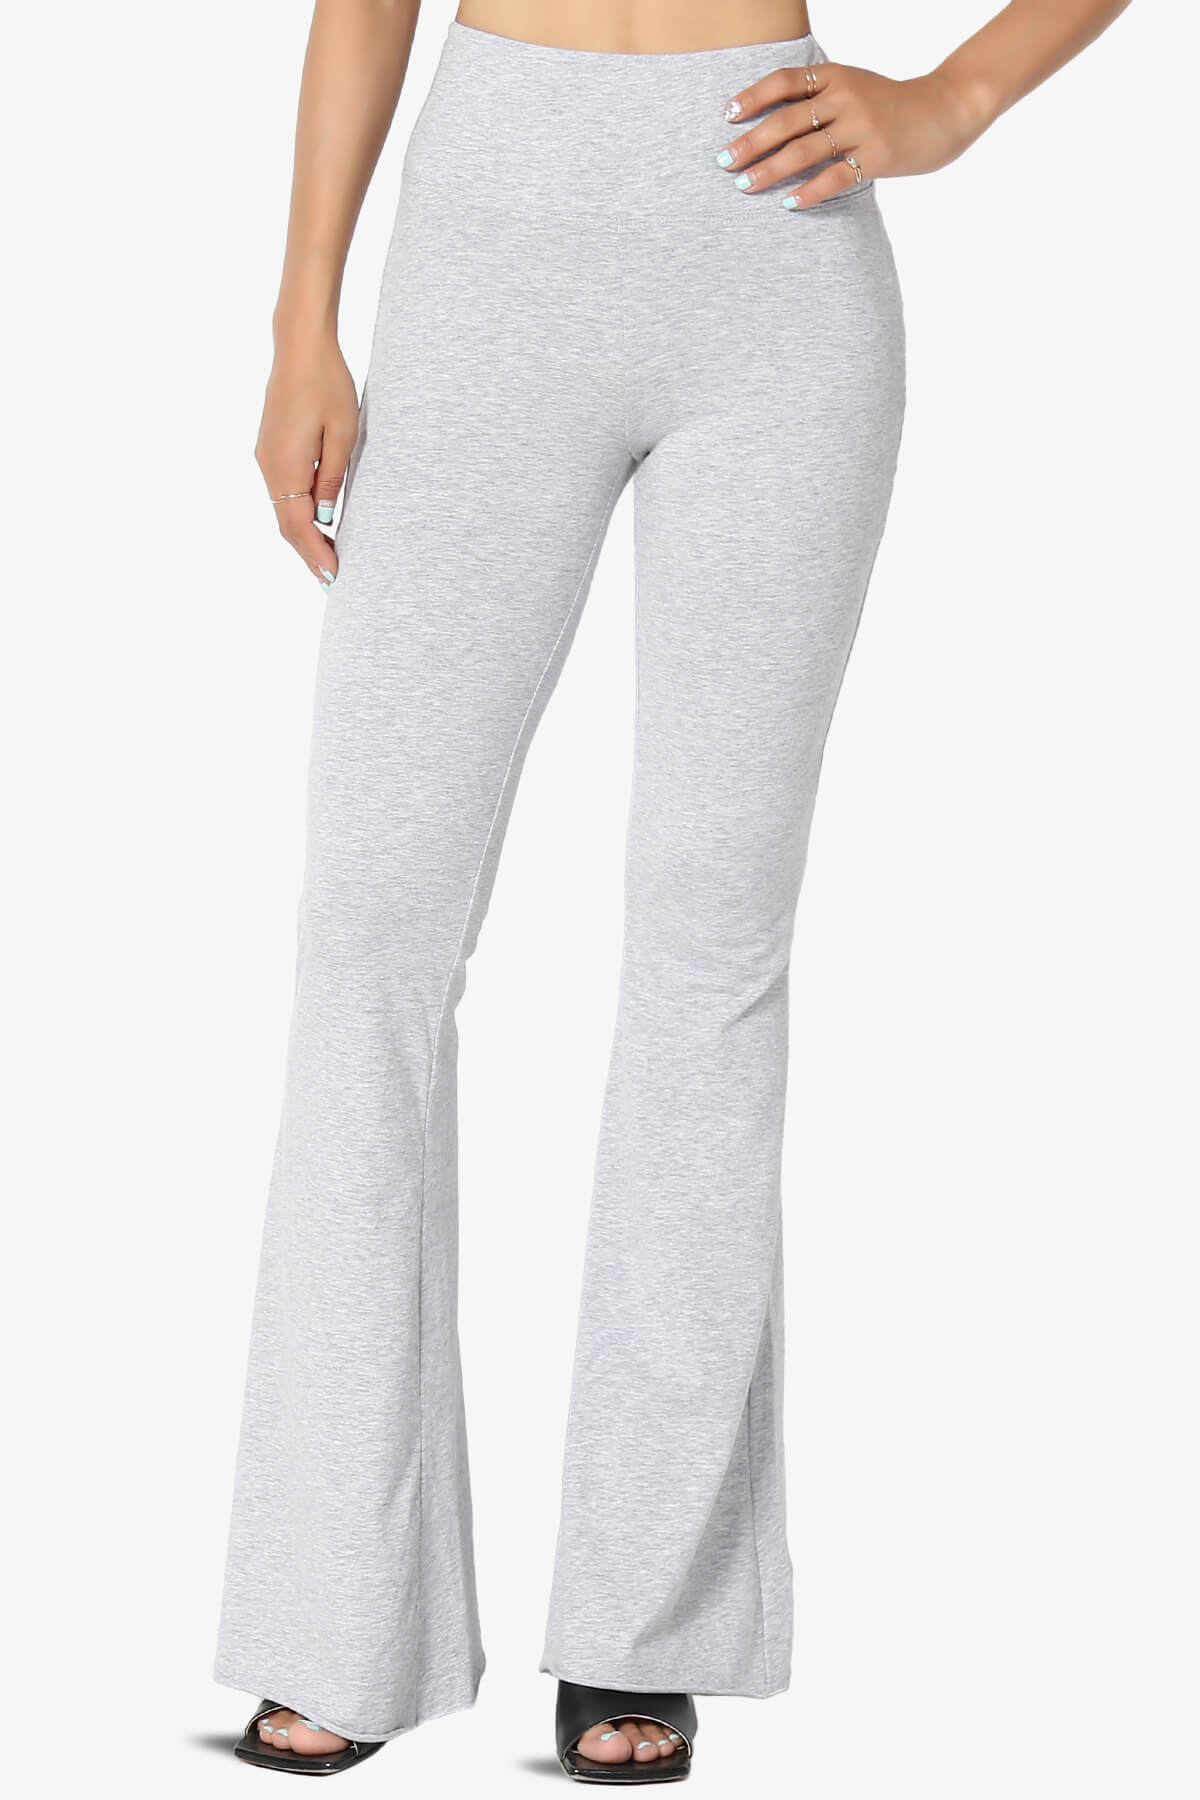 Load image into Gallery viewer, Zaylee Raw Hem Flared Comfy Yoga Pants HEATHER GREY_1
